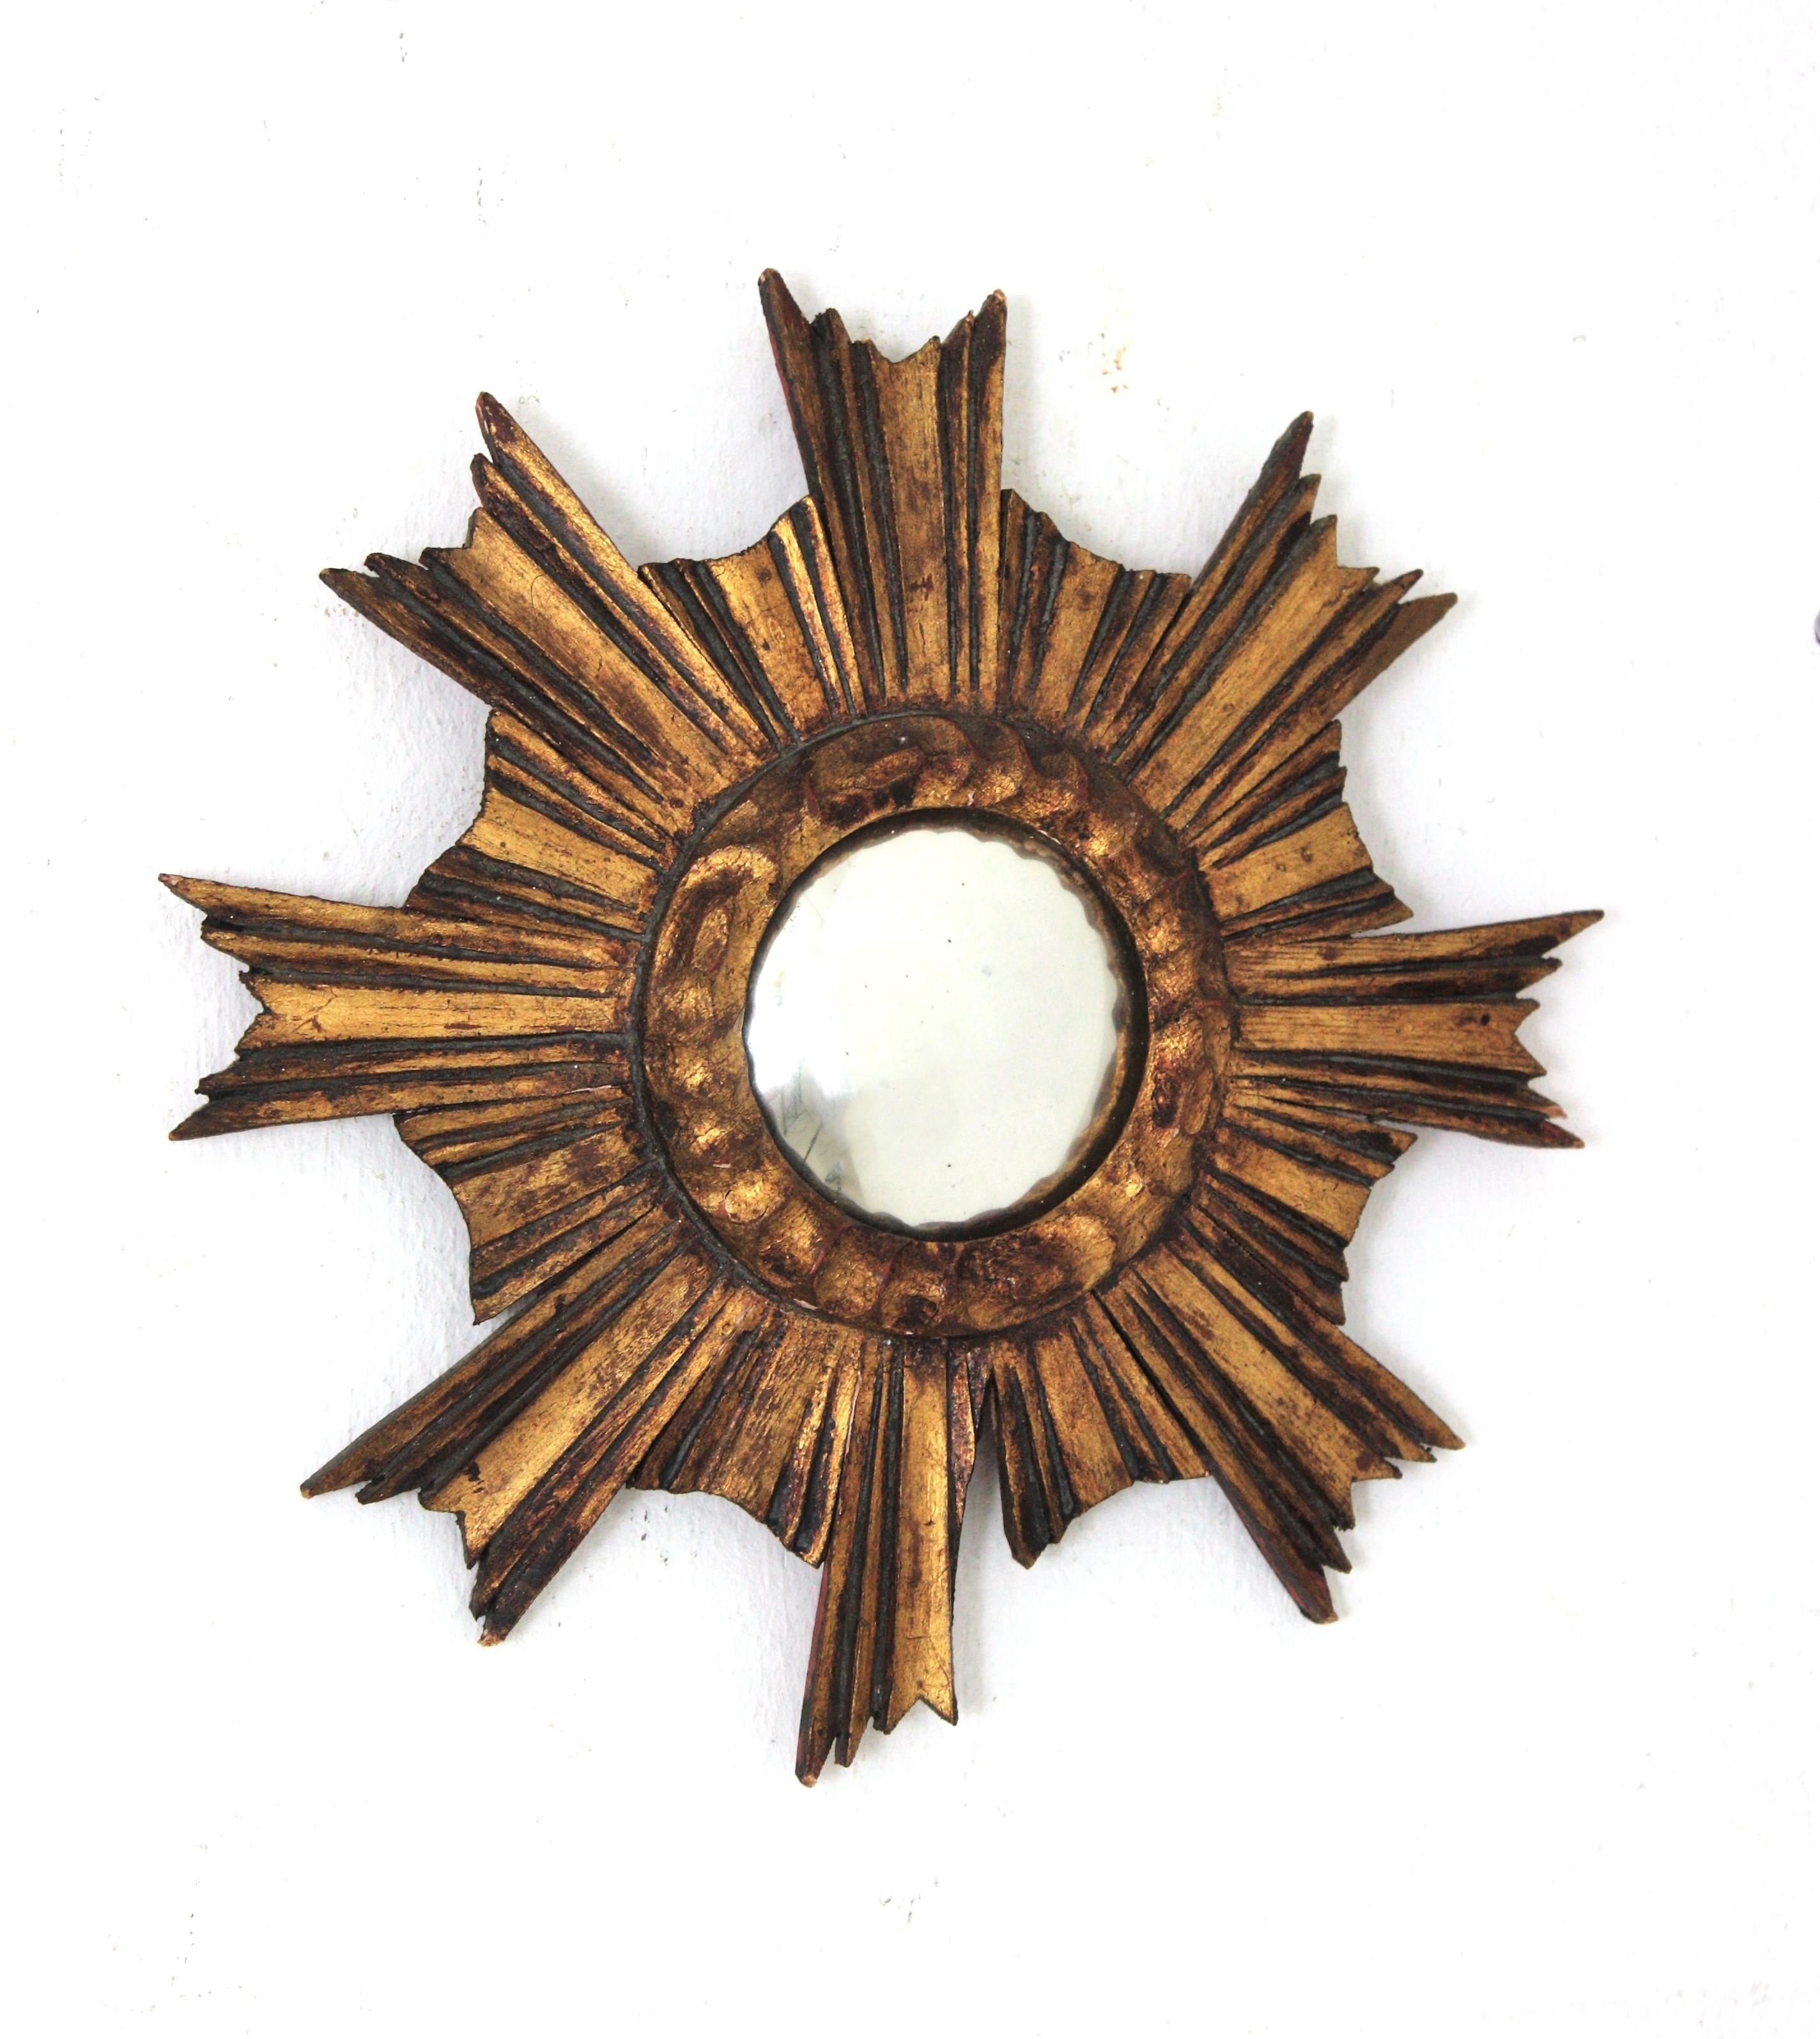 Wood Carved gold leaf gilded convex sunburst mirror in unusual mini size. Spain, 1930s-1940s.
This gorgeous miniature sunburst mirror has a frame comprised by carved rays in different sizes and convex glass. Finished in gold leaf gilding. This piece